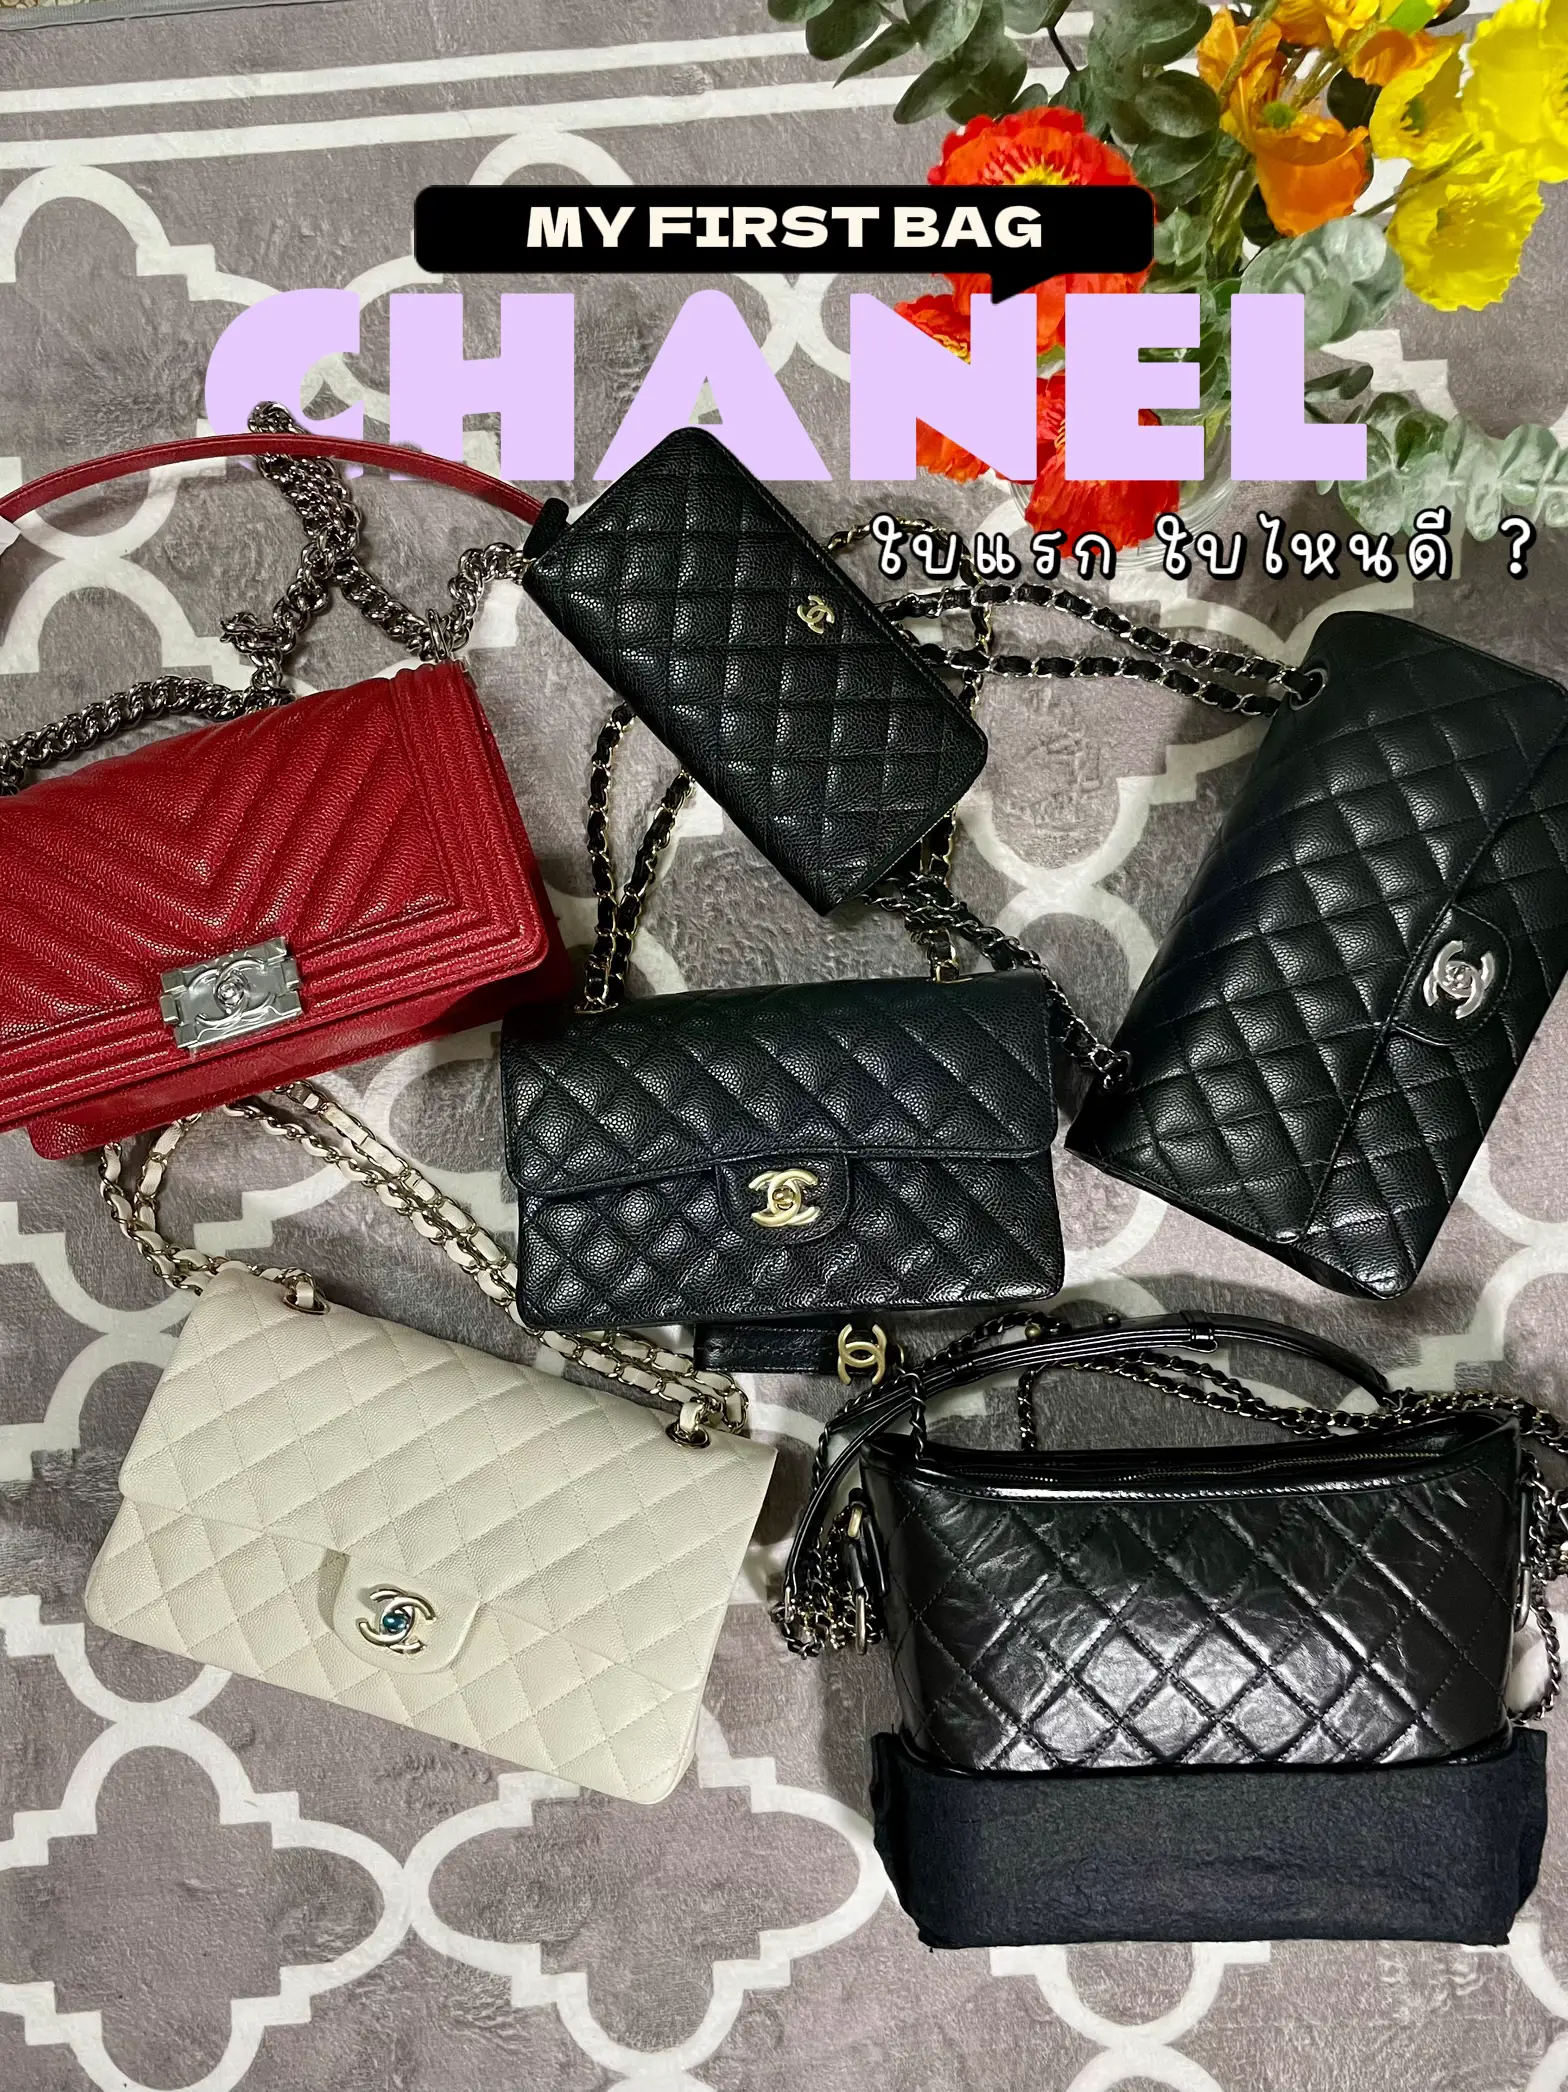 chanel foldable tote